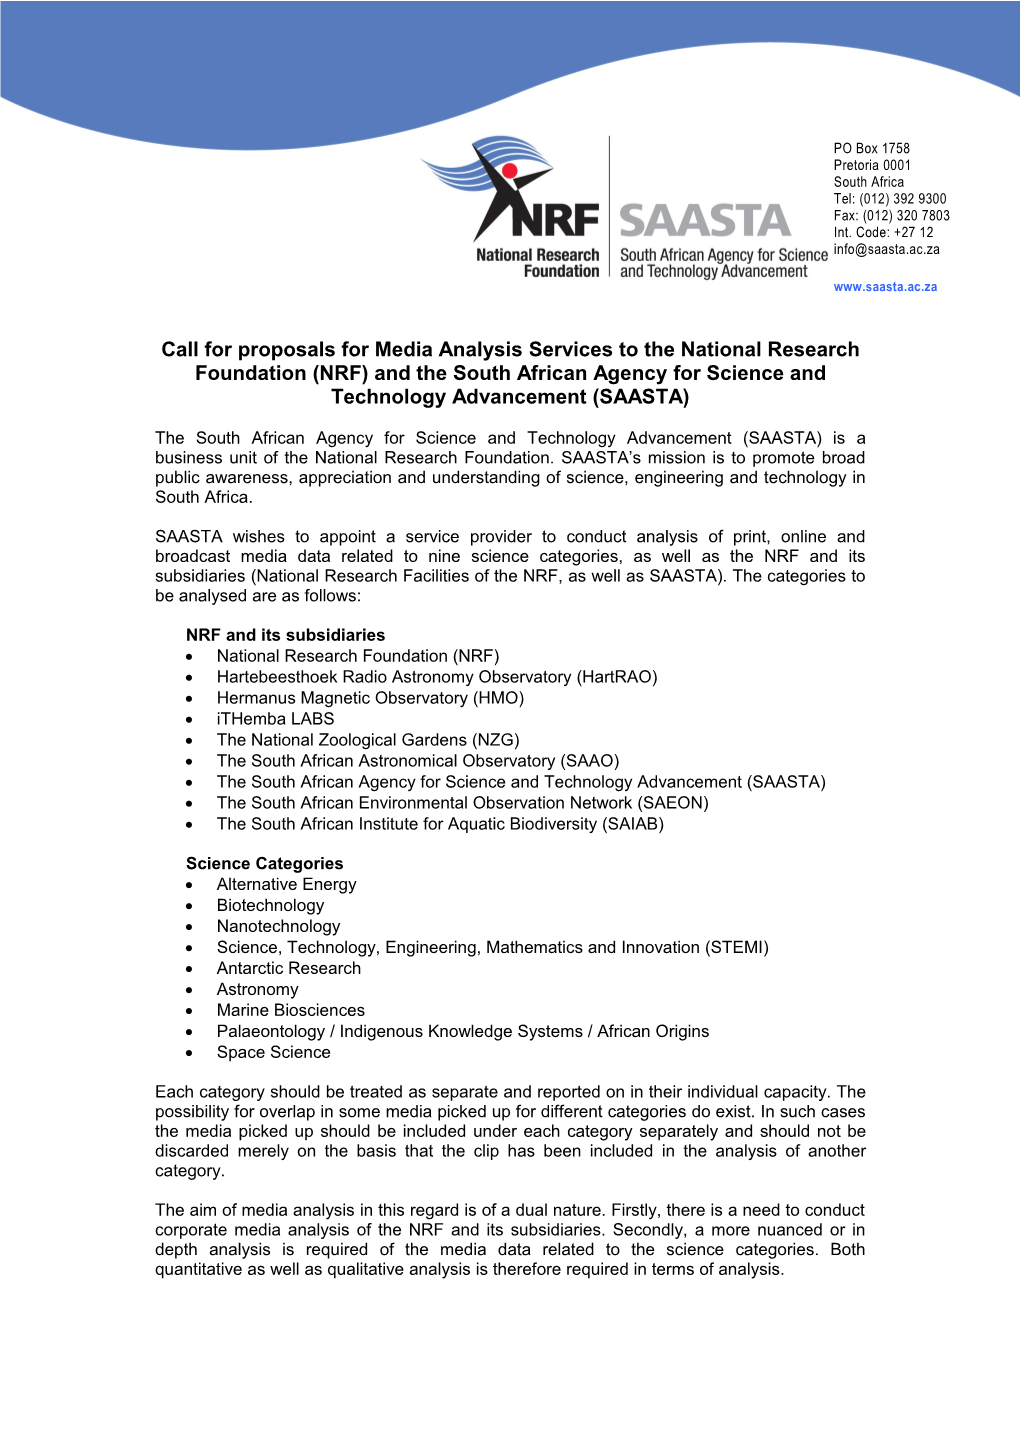 Call for Proposals for Media Analysis Services to the National Research Foundation (NRF)